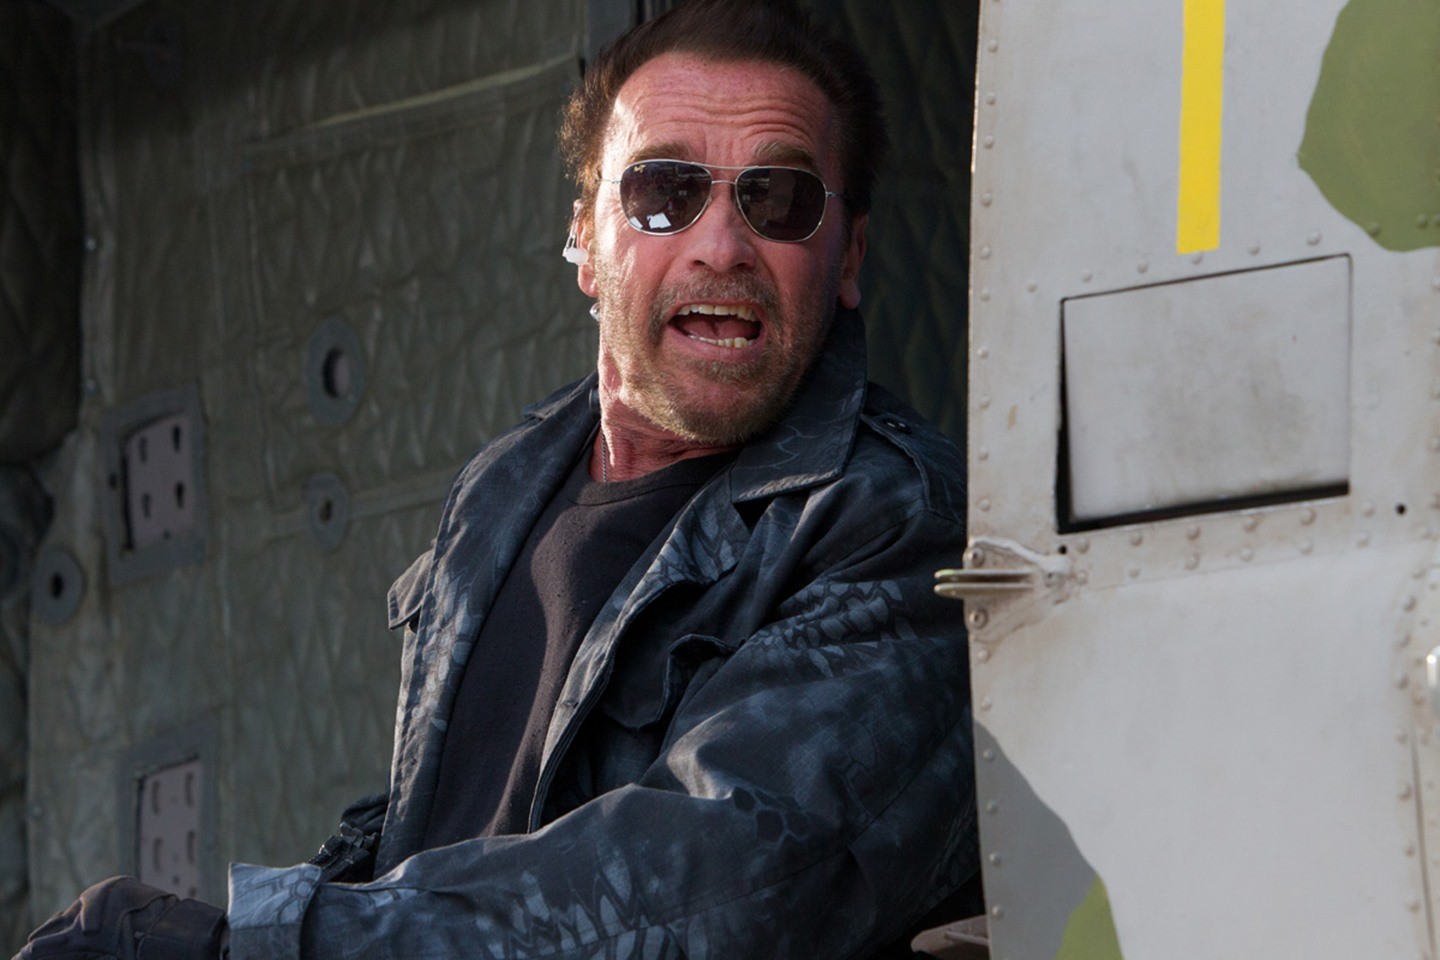 Arnold Schwarzenegger in The Expendables 3